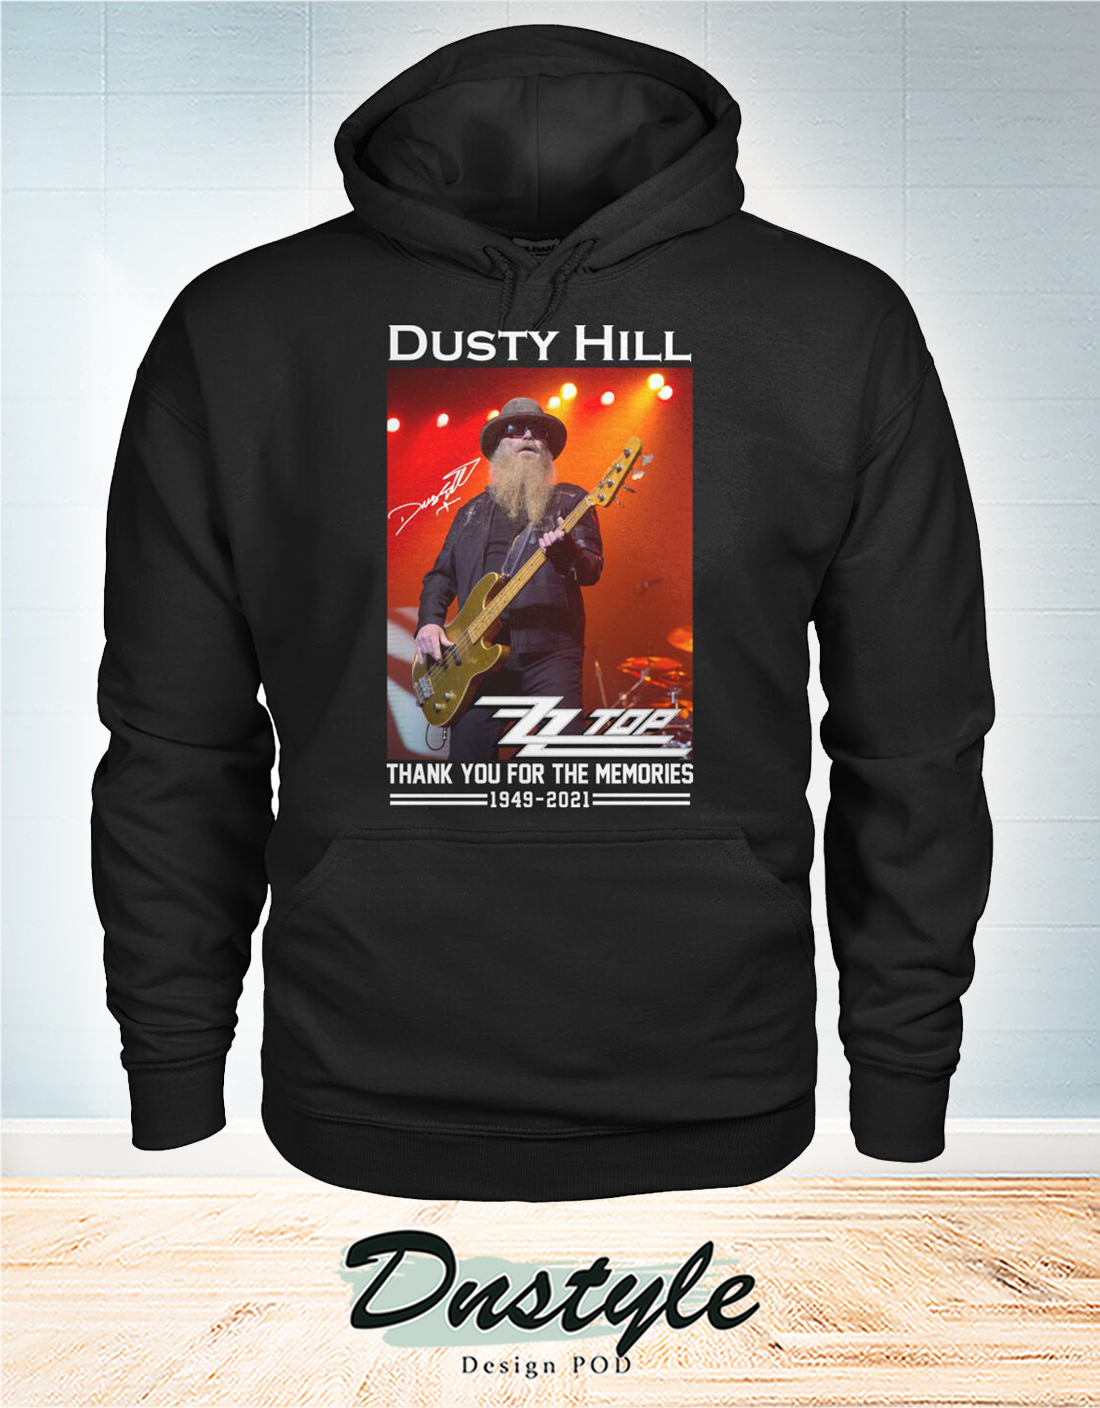 Zz Top Dusty Hill thanks for the memories hoodie